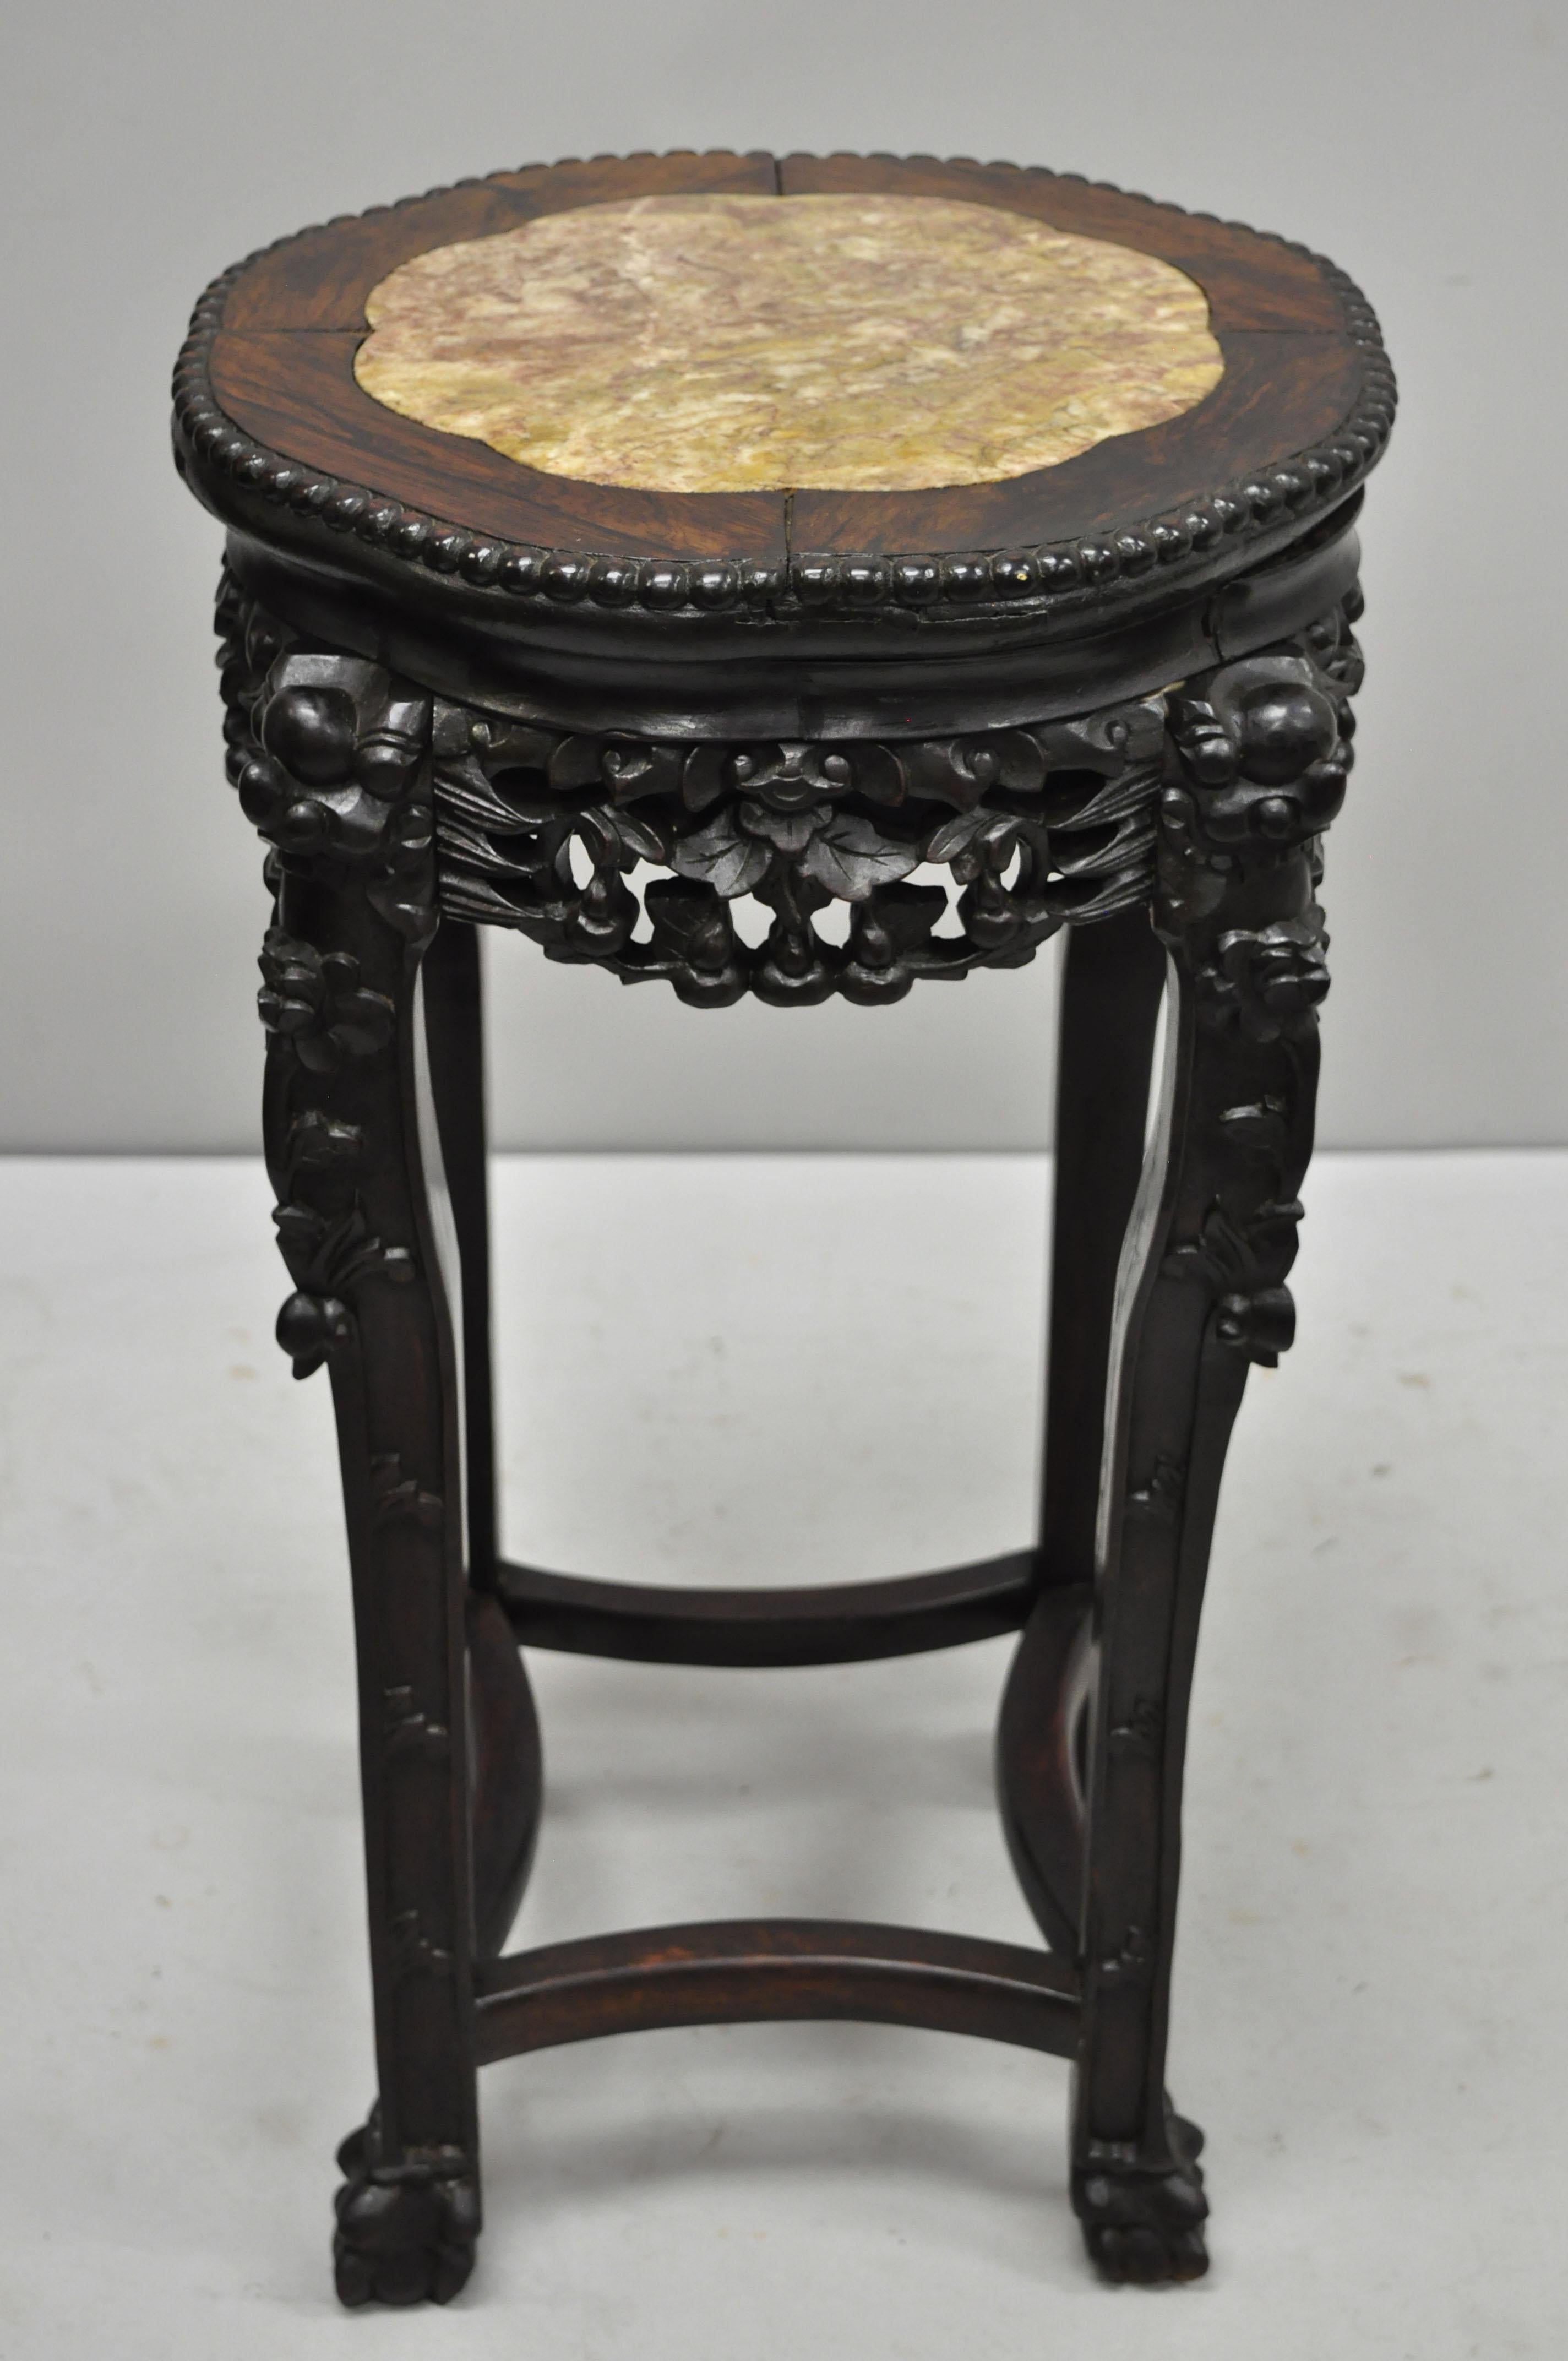 Antique carved hardwood rosewood and marble-top Chinese pedestal table (C). Item features inset marble top, pierce carved floral skirt, carved stretcher base, solid wood construction, finely carved details, very nice antique item, circa late